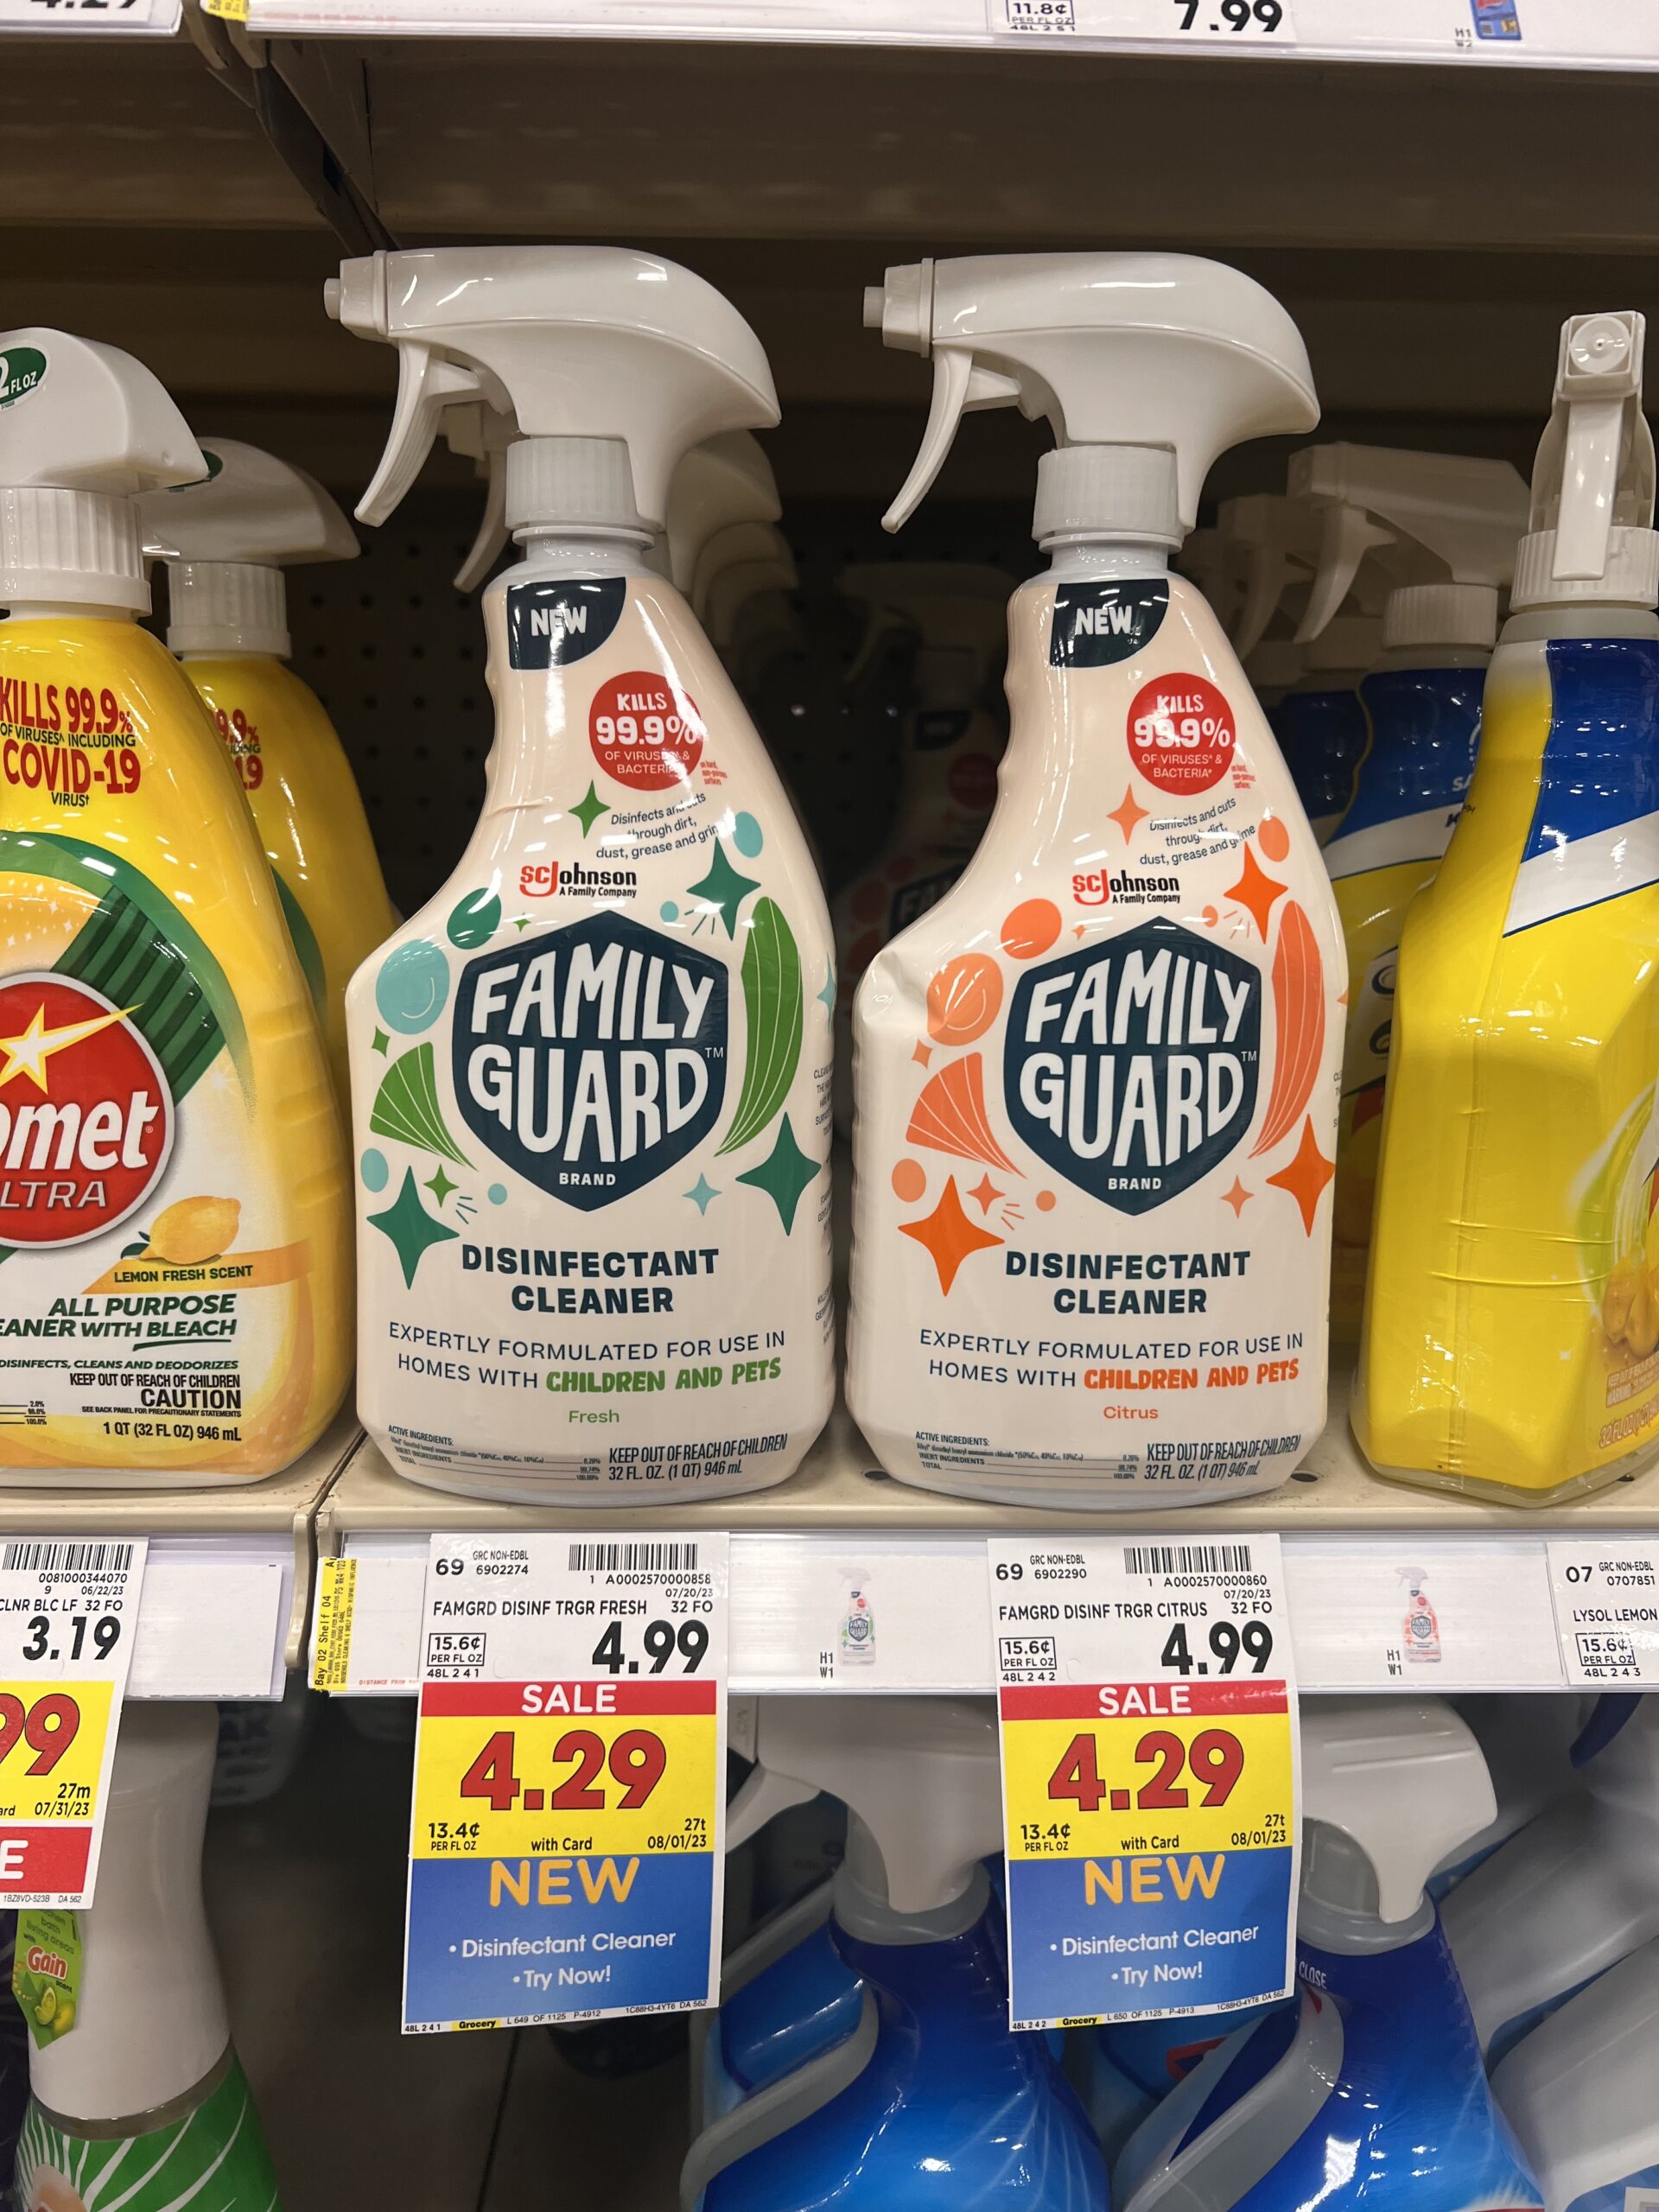 family guard cleaners kroger shelf image